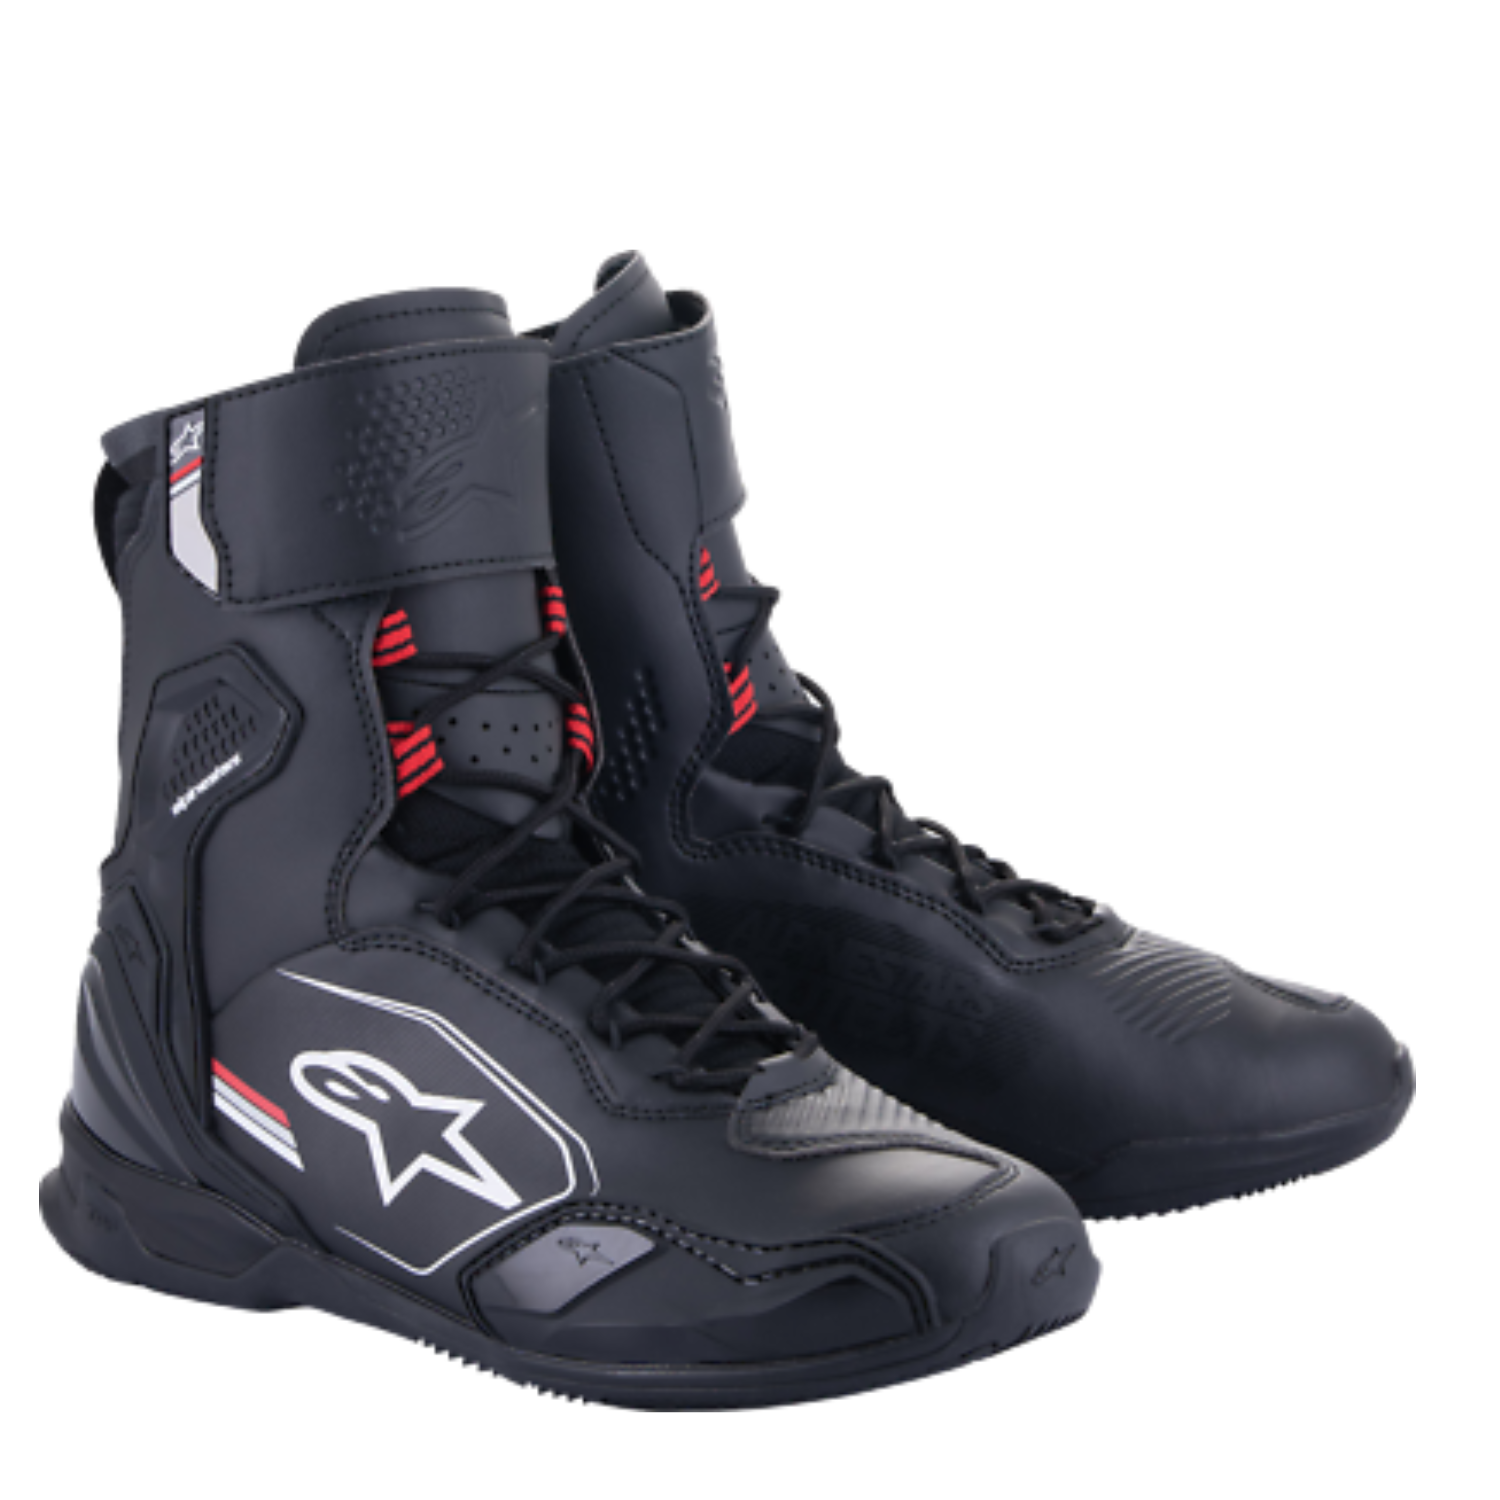 Image of EU Alpinestars Superfaster Shoes Black Gray Bright Red Taille US 6